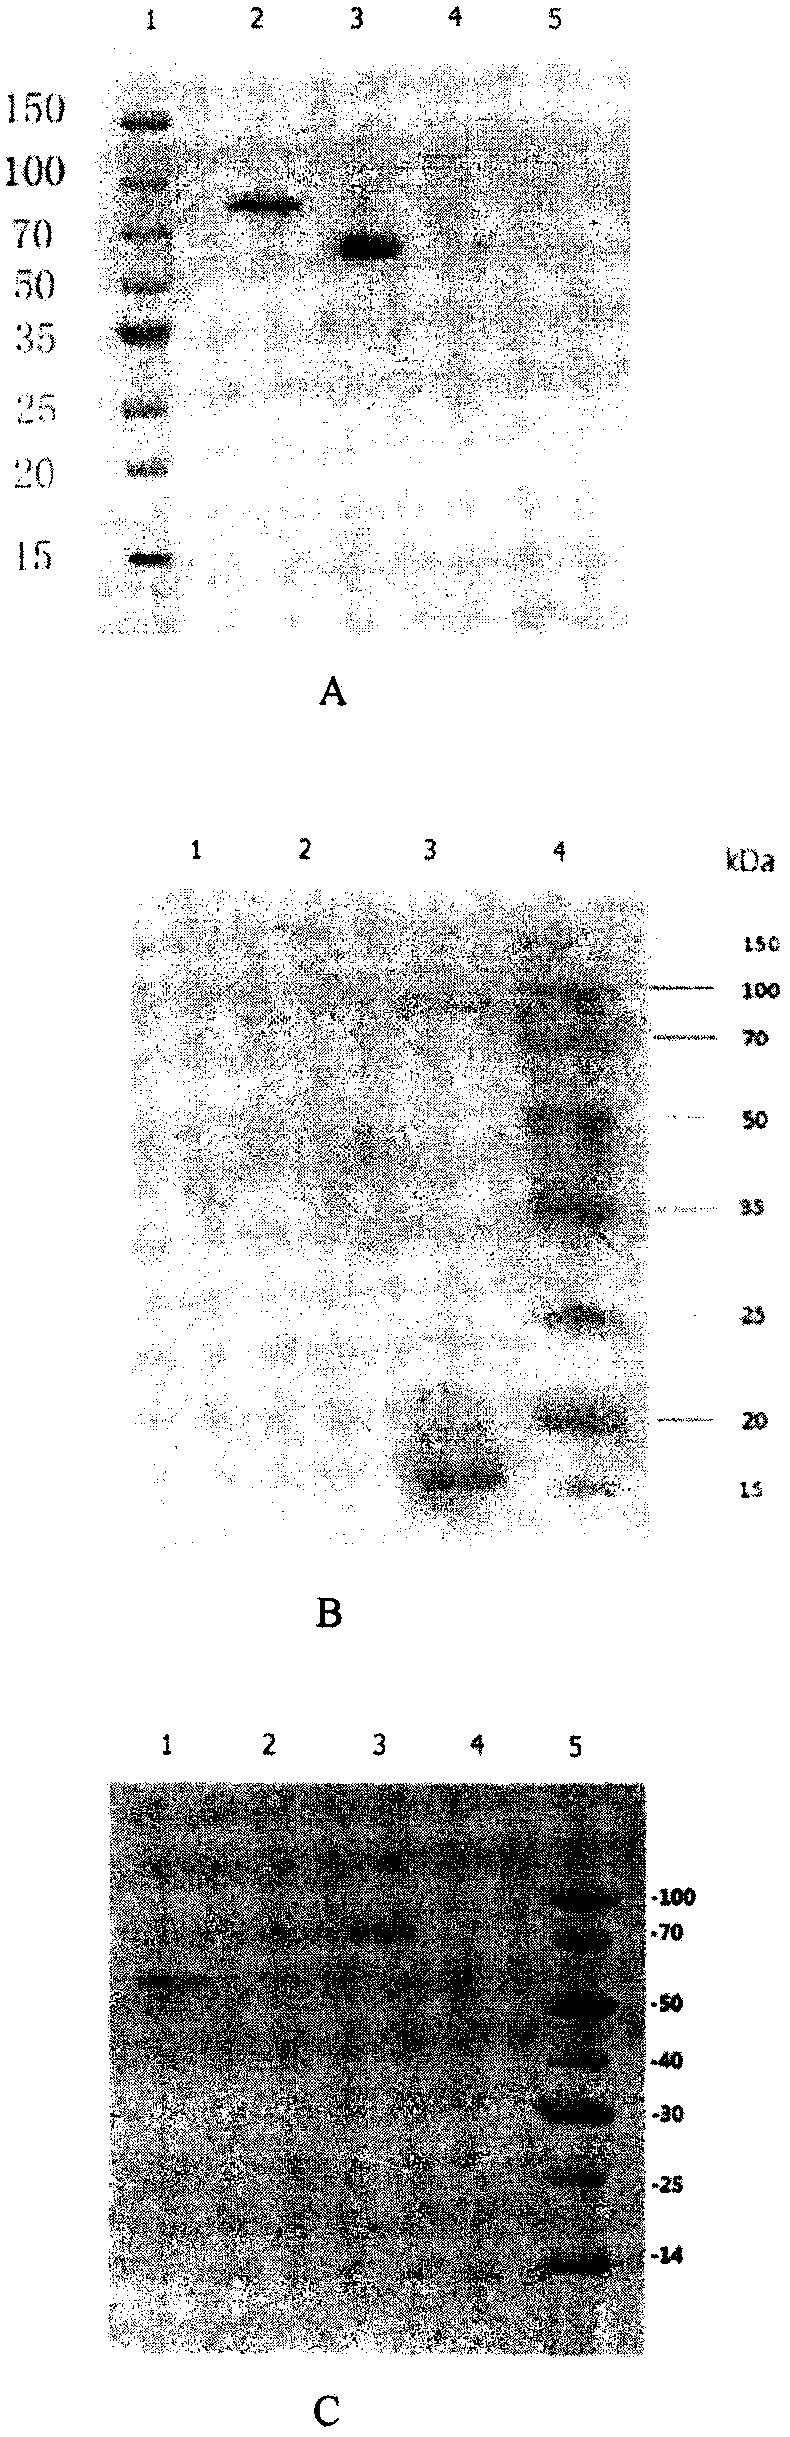 Use of carrier peptides for linking B epitope or semiantigen and immunogen containing carrier peptide in medicine and immunology